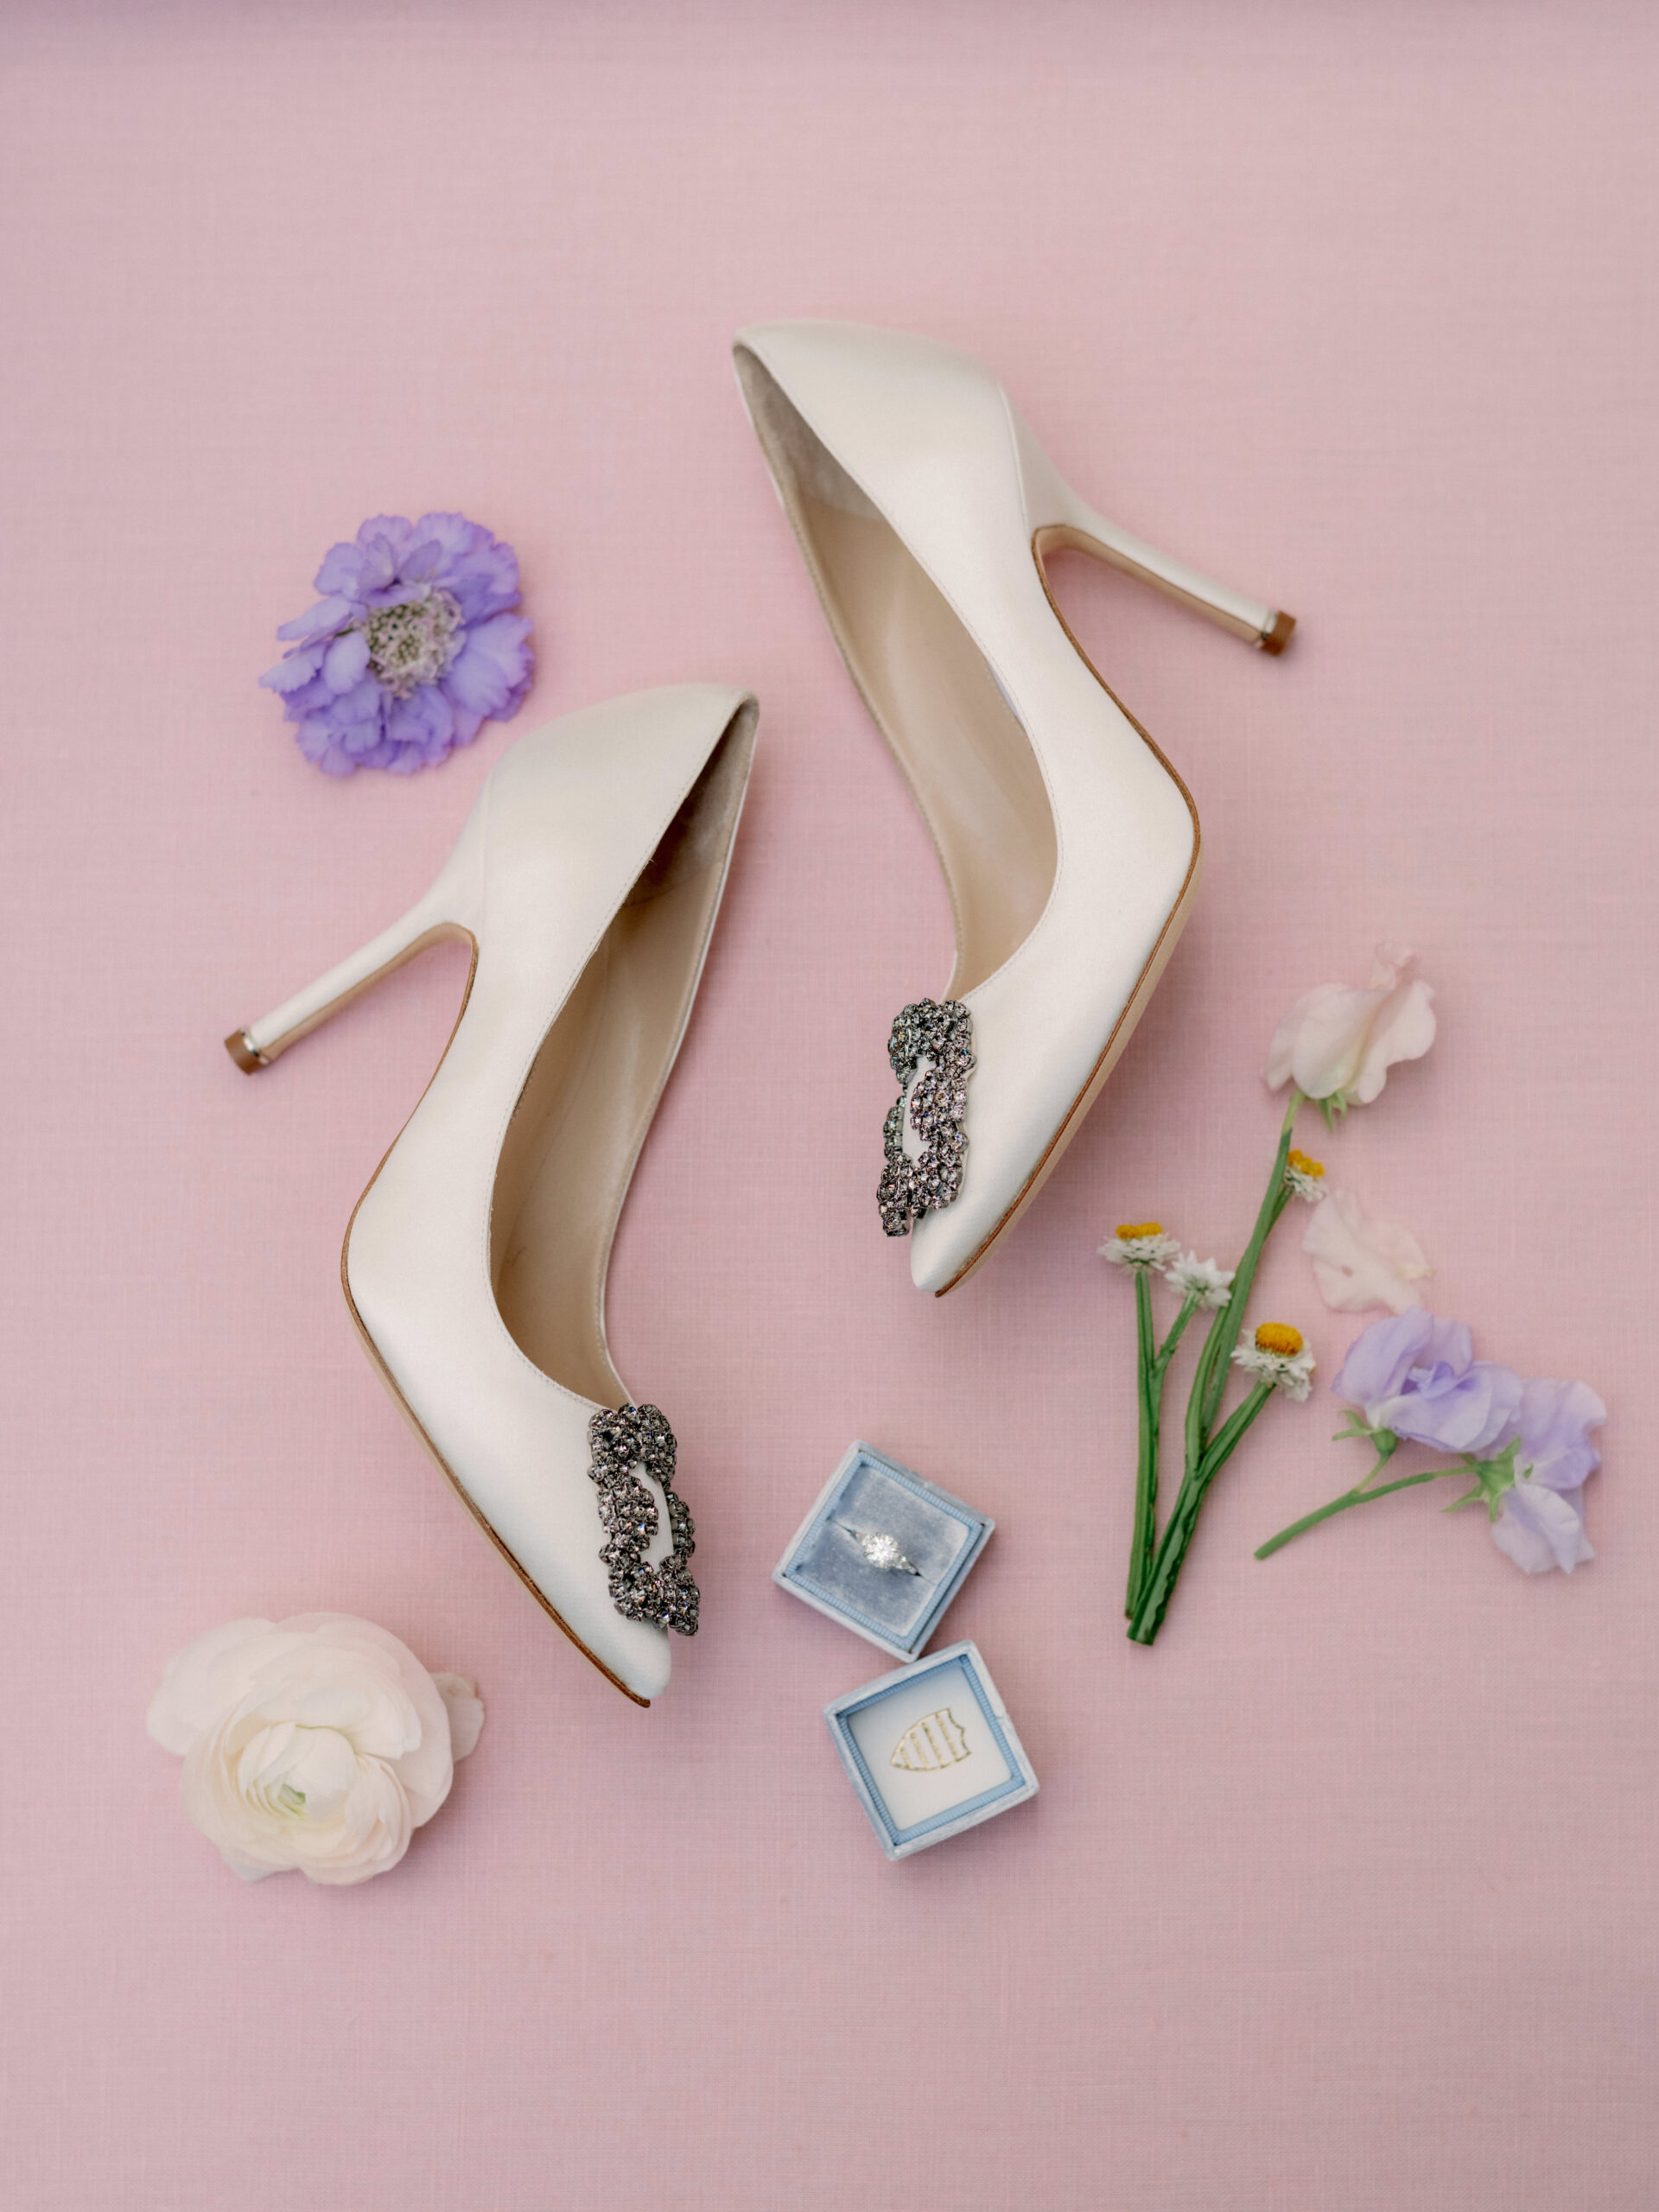 Bridal shoes and ring. Wedding details image by Jenny Fu Studio